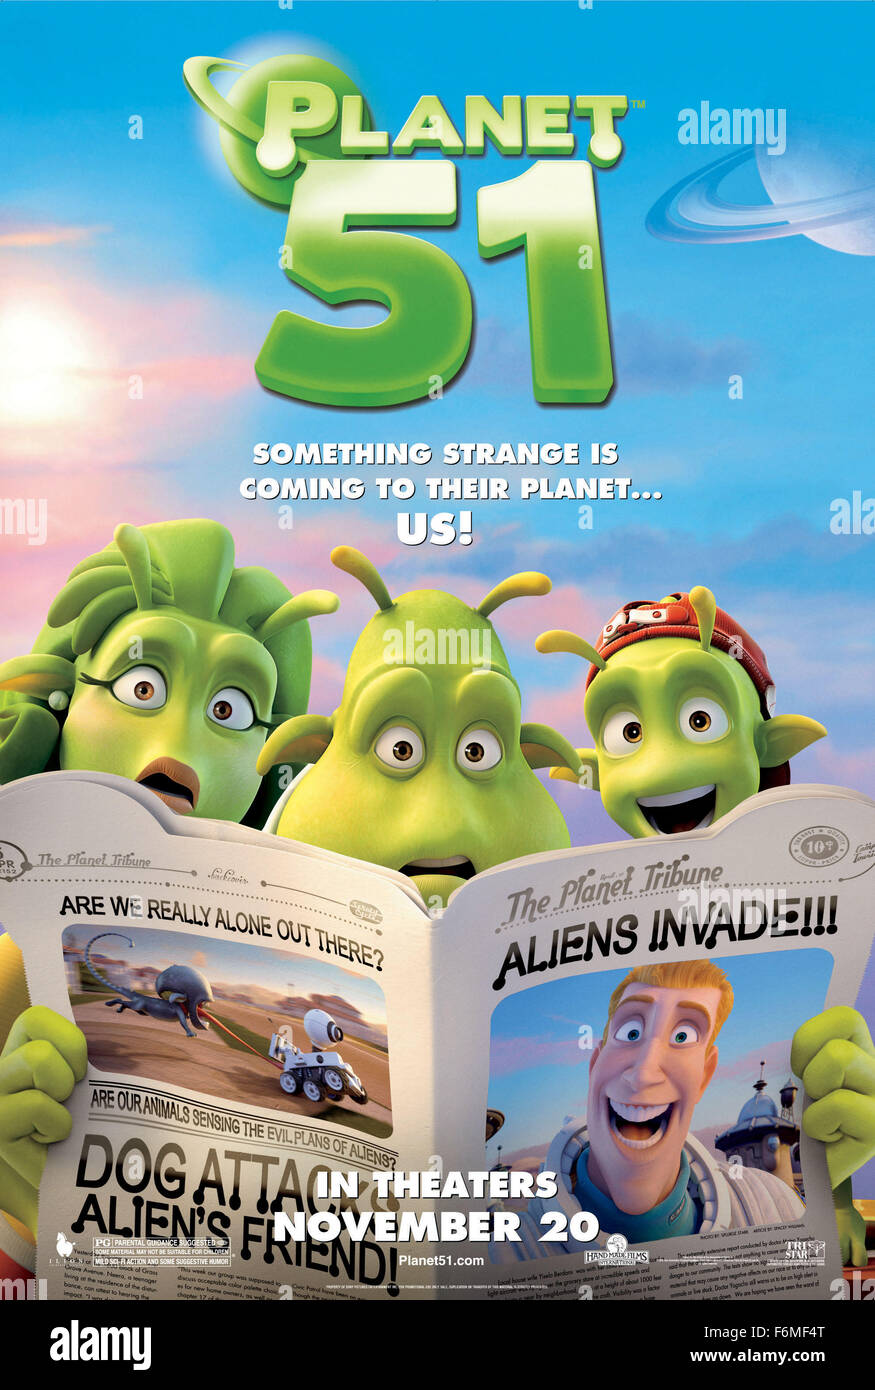 RELEASE DATE: November 20, 2009. MOVIE TITLE: Planet 51. STUDIO: Ilion  Animation. PLOT: Lem is just an average teenager working on getting the  girl and furthering his career at the local planetarium -